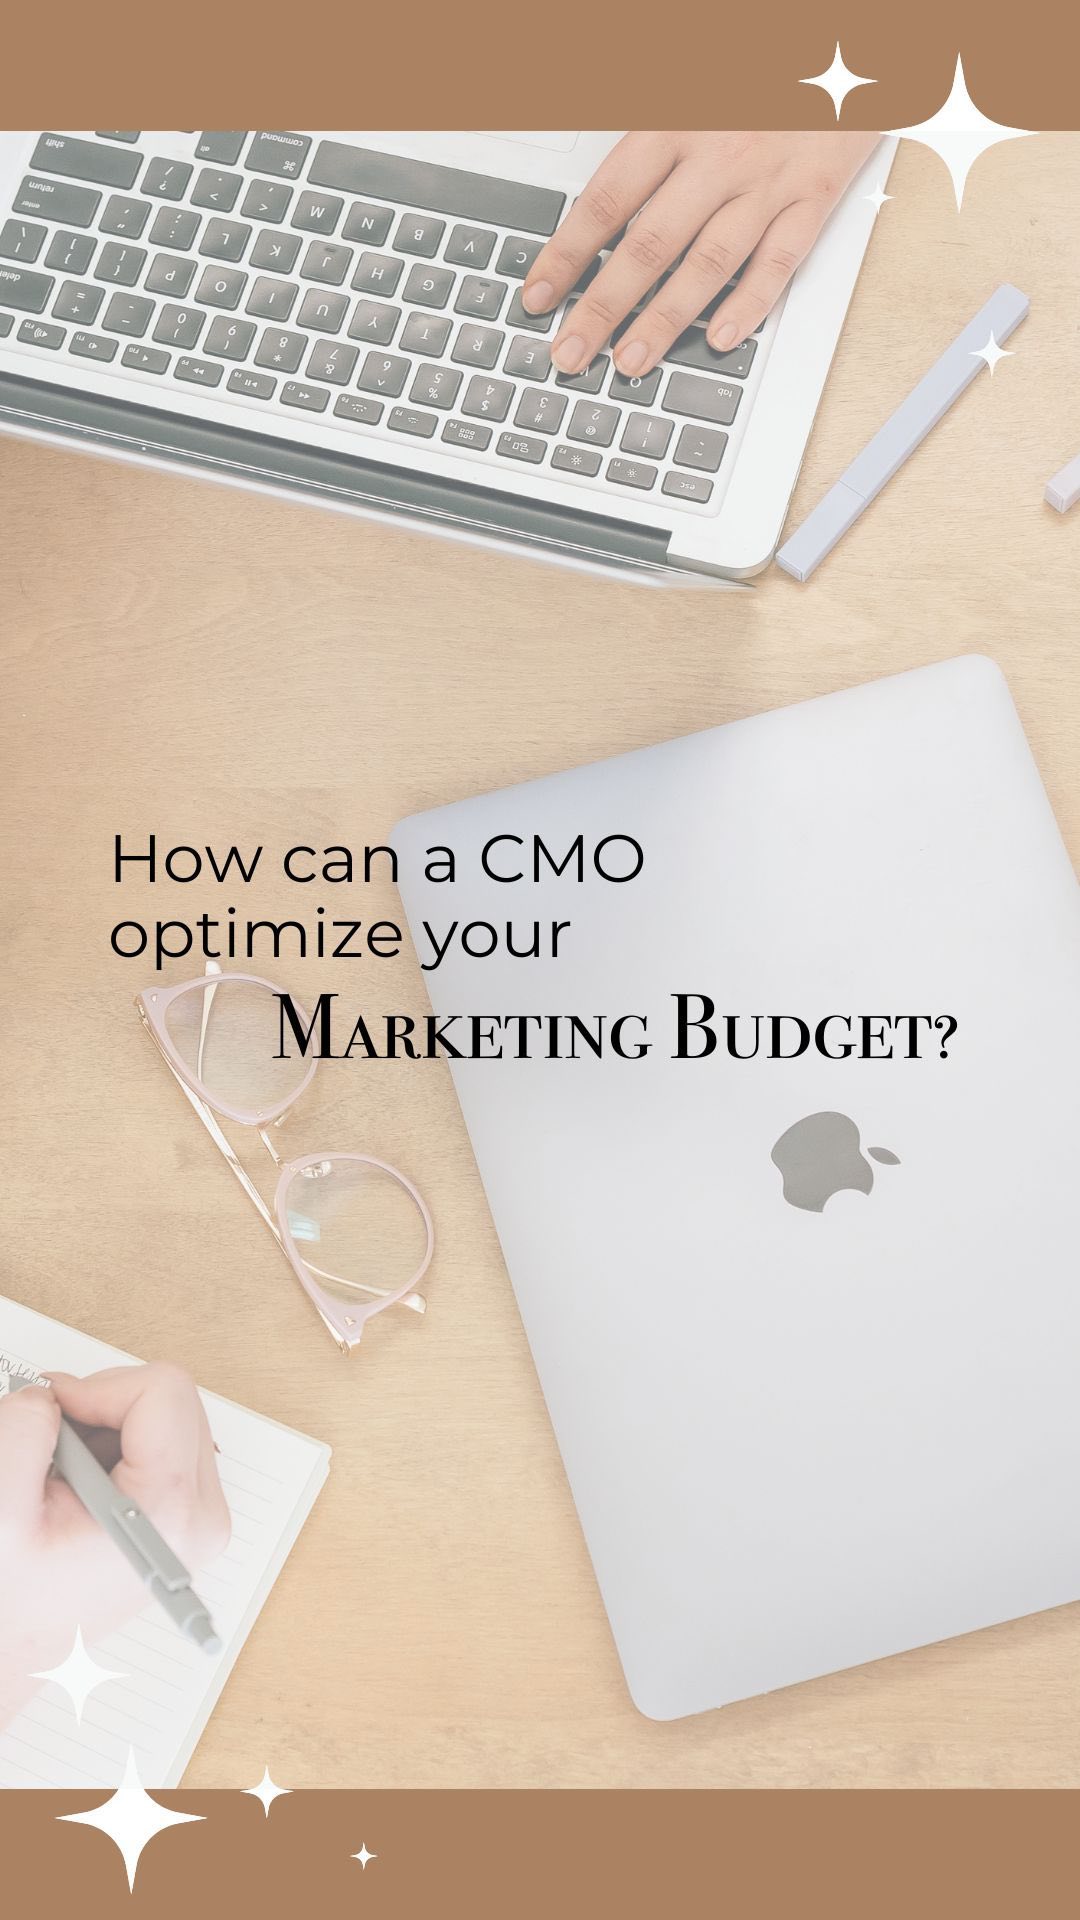 How can a CMO optimize your marketing budget? 💸

A CMO thinks big picture 📸, evaluating how all the pieces need to come together and how to get work done the most efficient way. Efficiency is the best way to increase profitability by trimming the fat out of processes that are eating up precious time and resources! 

If you could use help dialing in your marketing budget, look no further! Our GROUNDED: Holistic CEO Coaching & Fractional CMO Program was made to give you major marketing support without the huge agency price tag. 

Learn more at the link in our bio! 

#cmo #fractionalcmo #marketingagency #fortcollins #womensupportingwomen #womenleaders